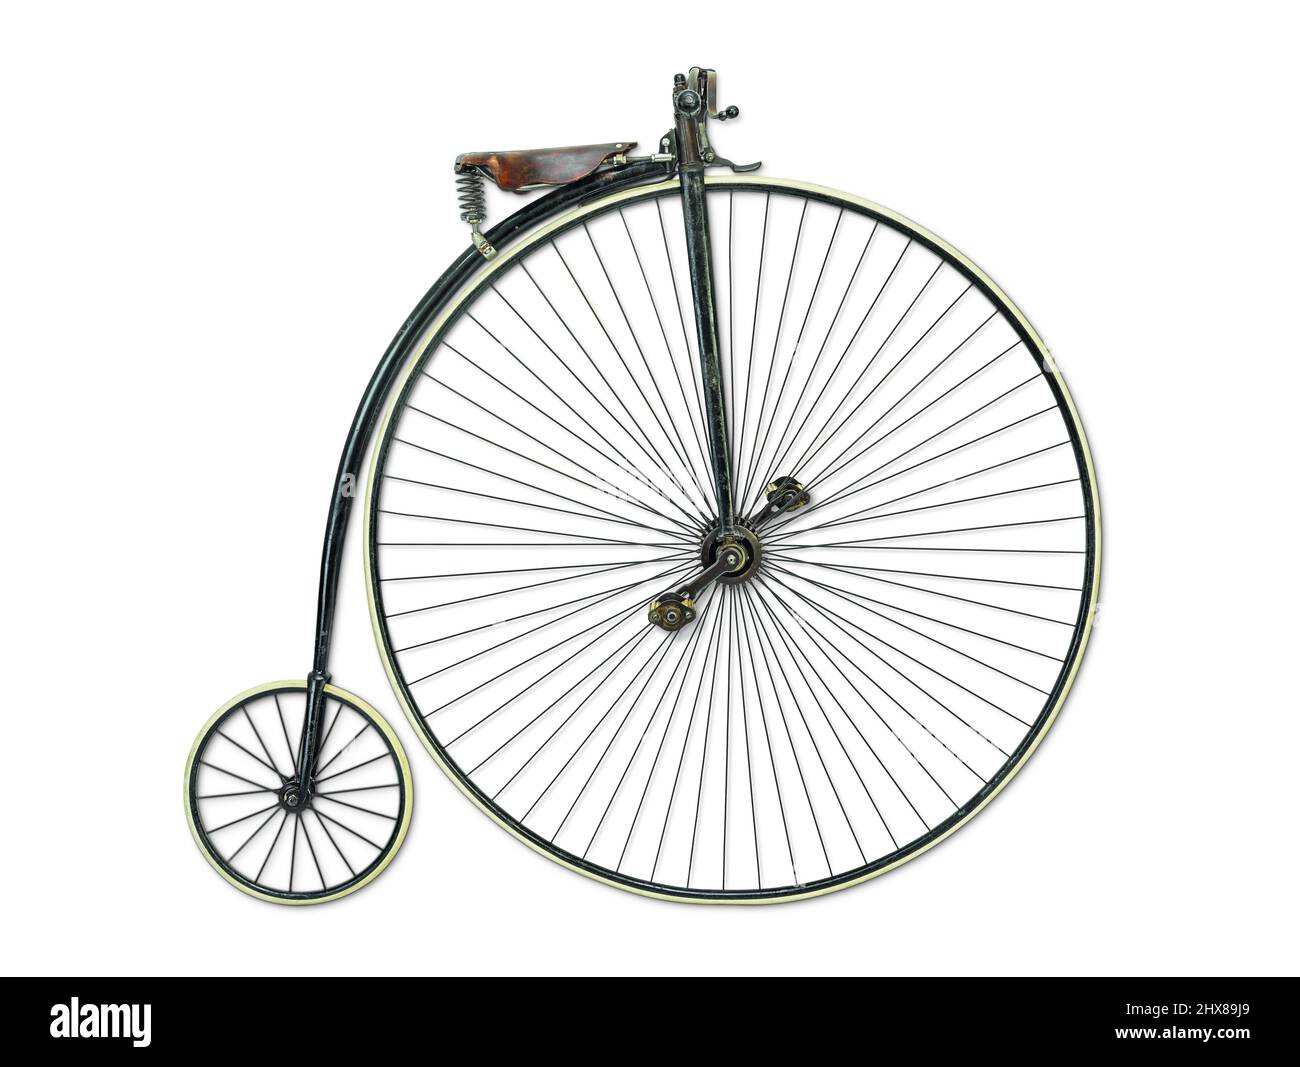 Hochrad Kleyer Adler (Penny Farthing), Frankfurt, Germany, 1885, side view, drive side, No gears, Steel frame/solid rubber tyres, 52 inches wheel size Stock Photo